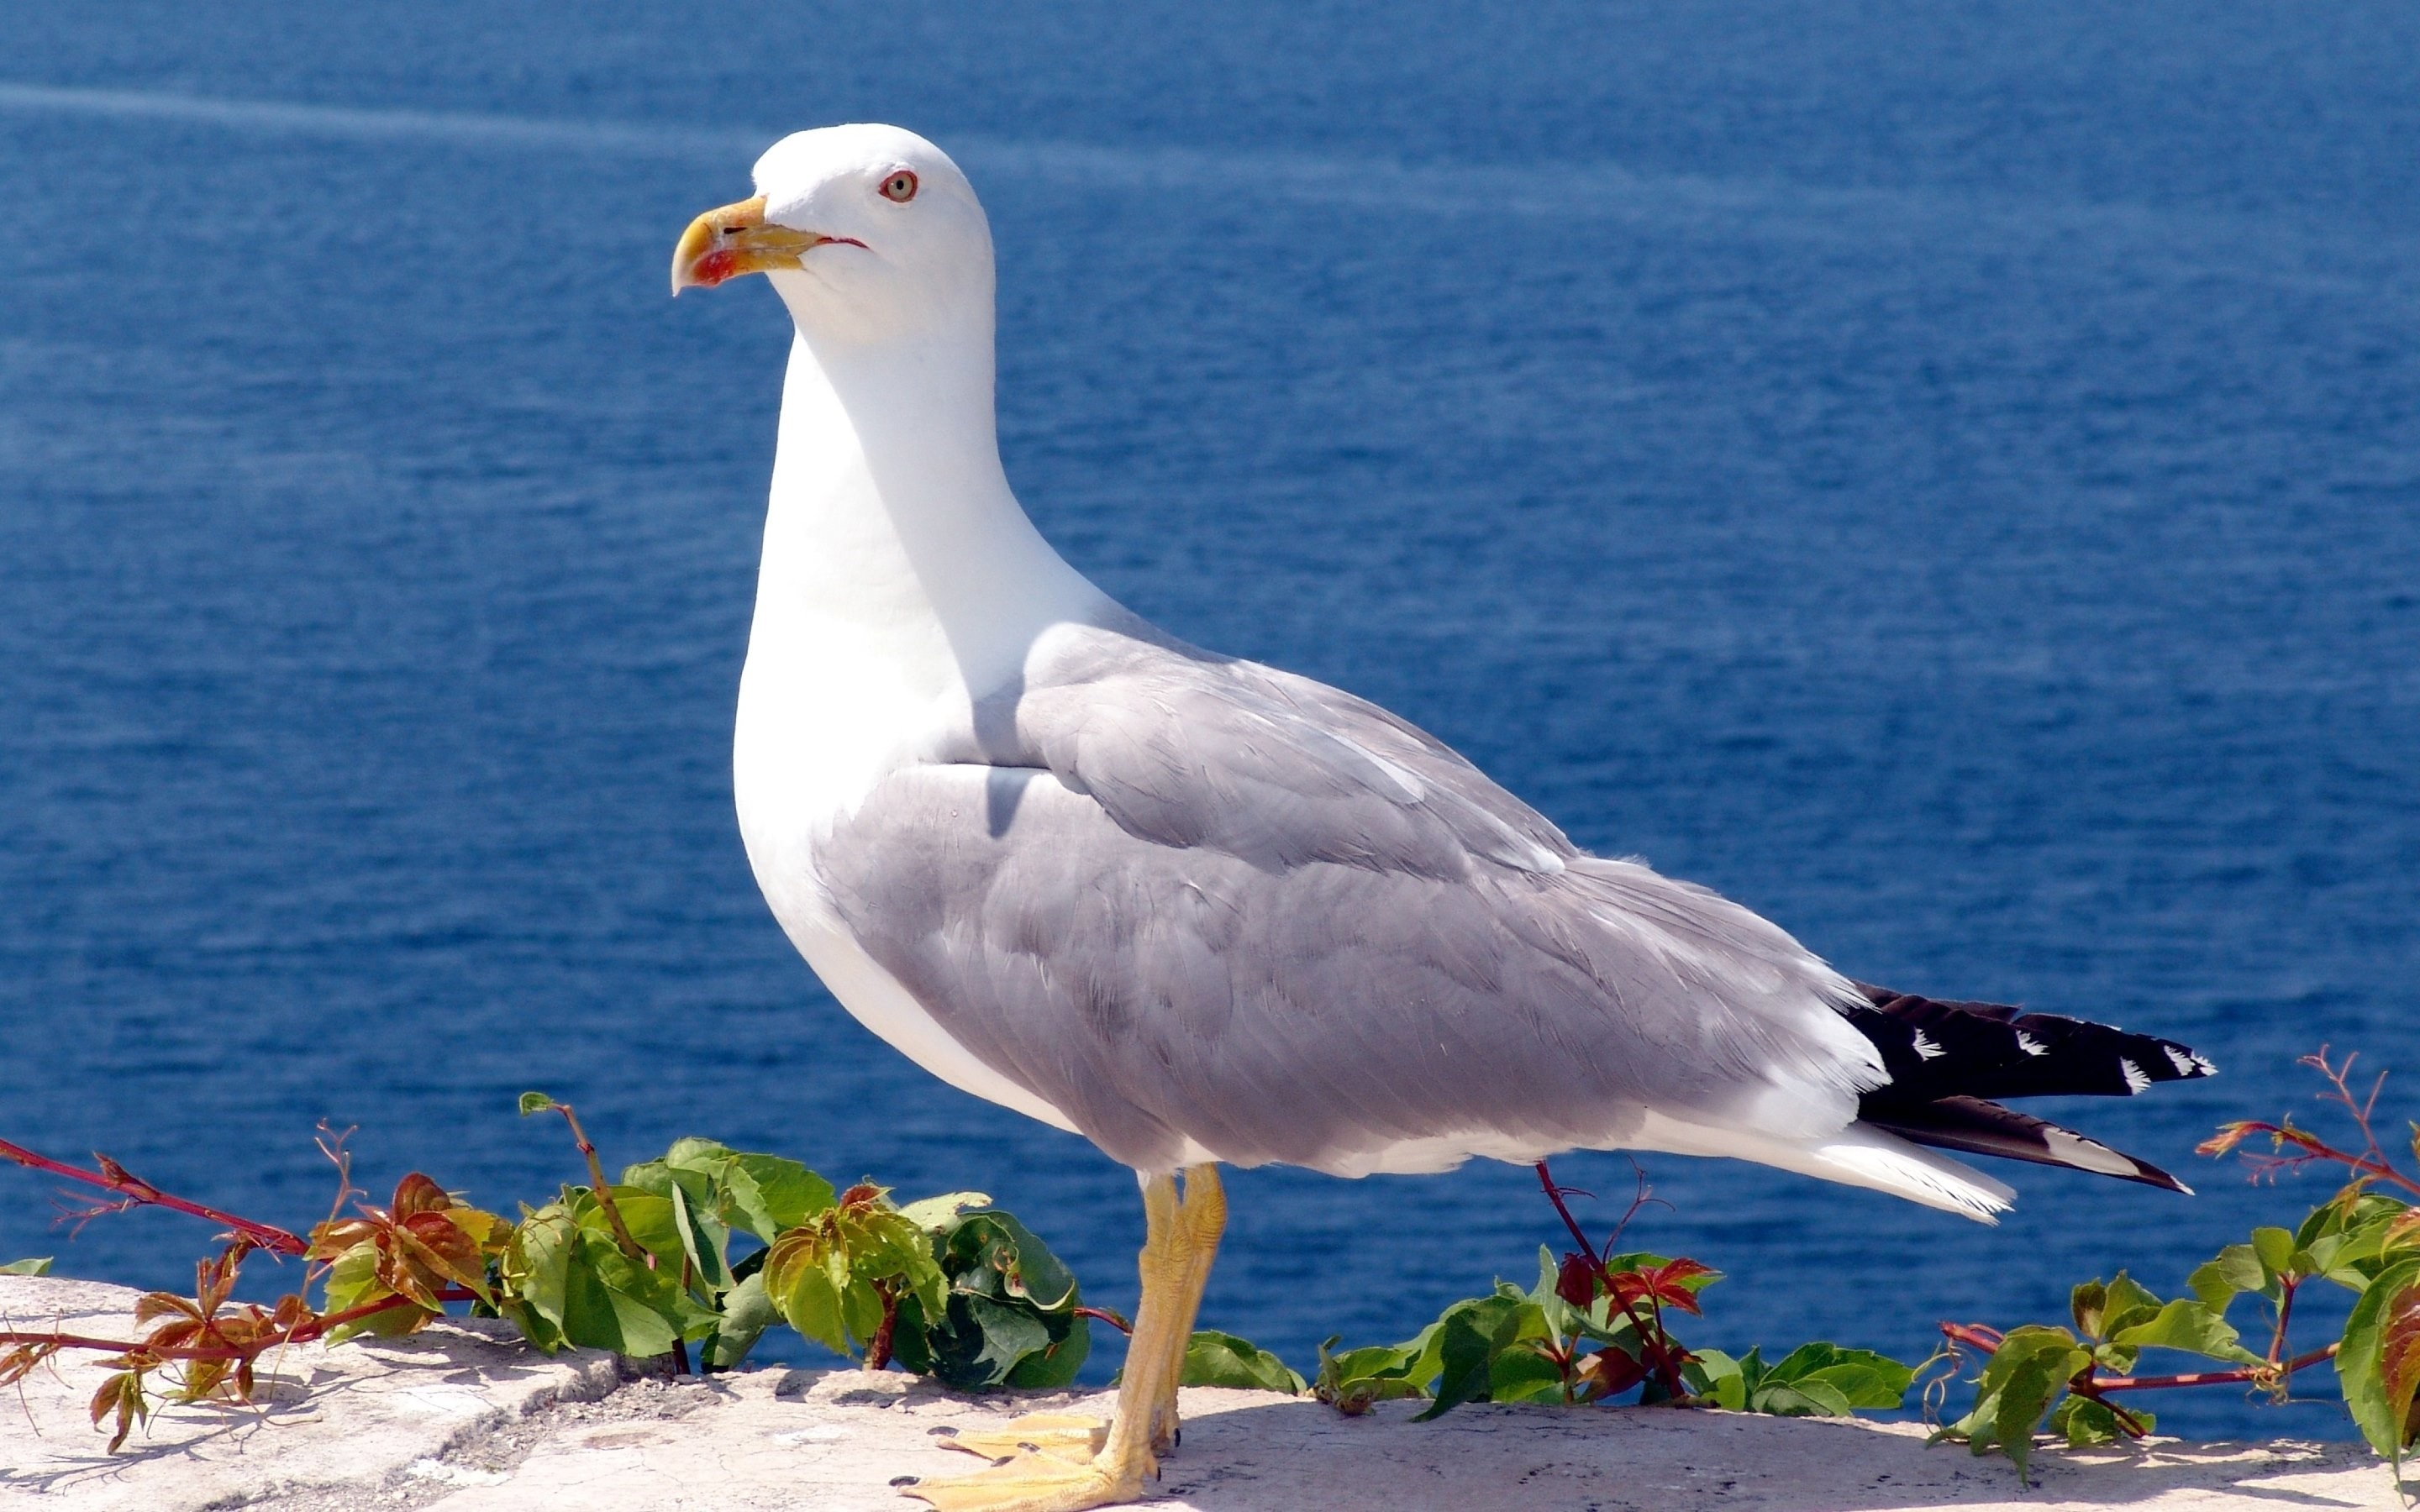 Seagull wallpaper, High-quality pictures, Striking imagery, Nature's charm, 2880x1800 HD Desktop